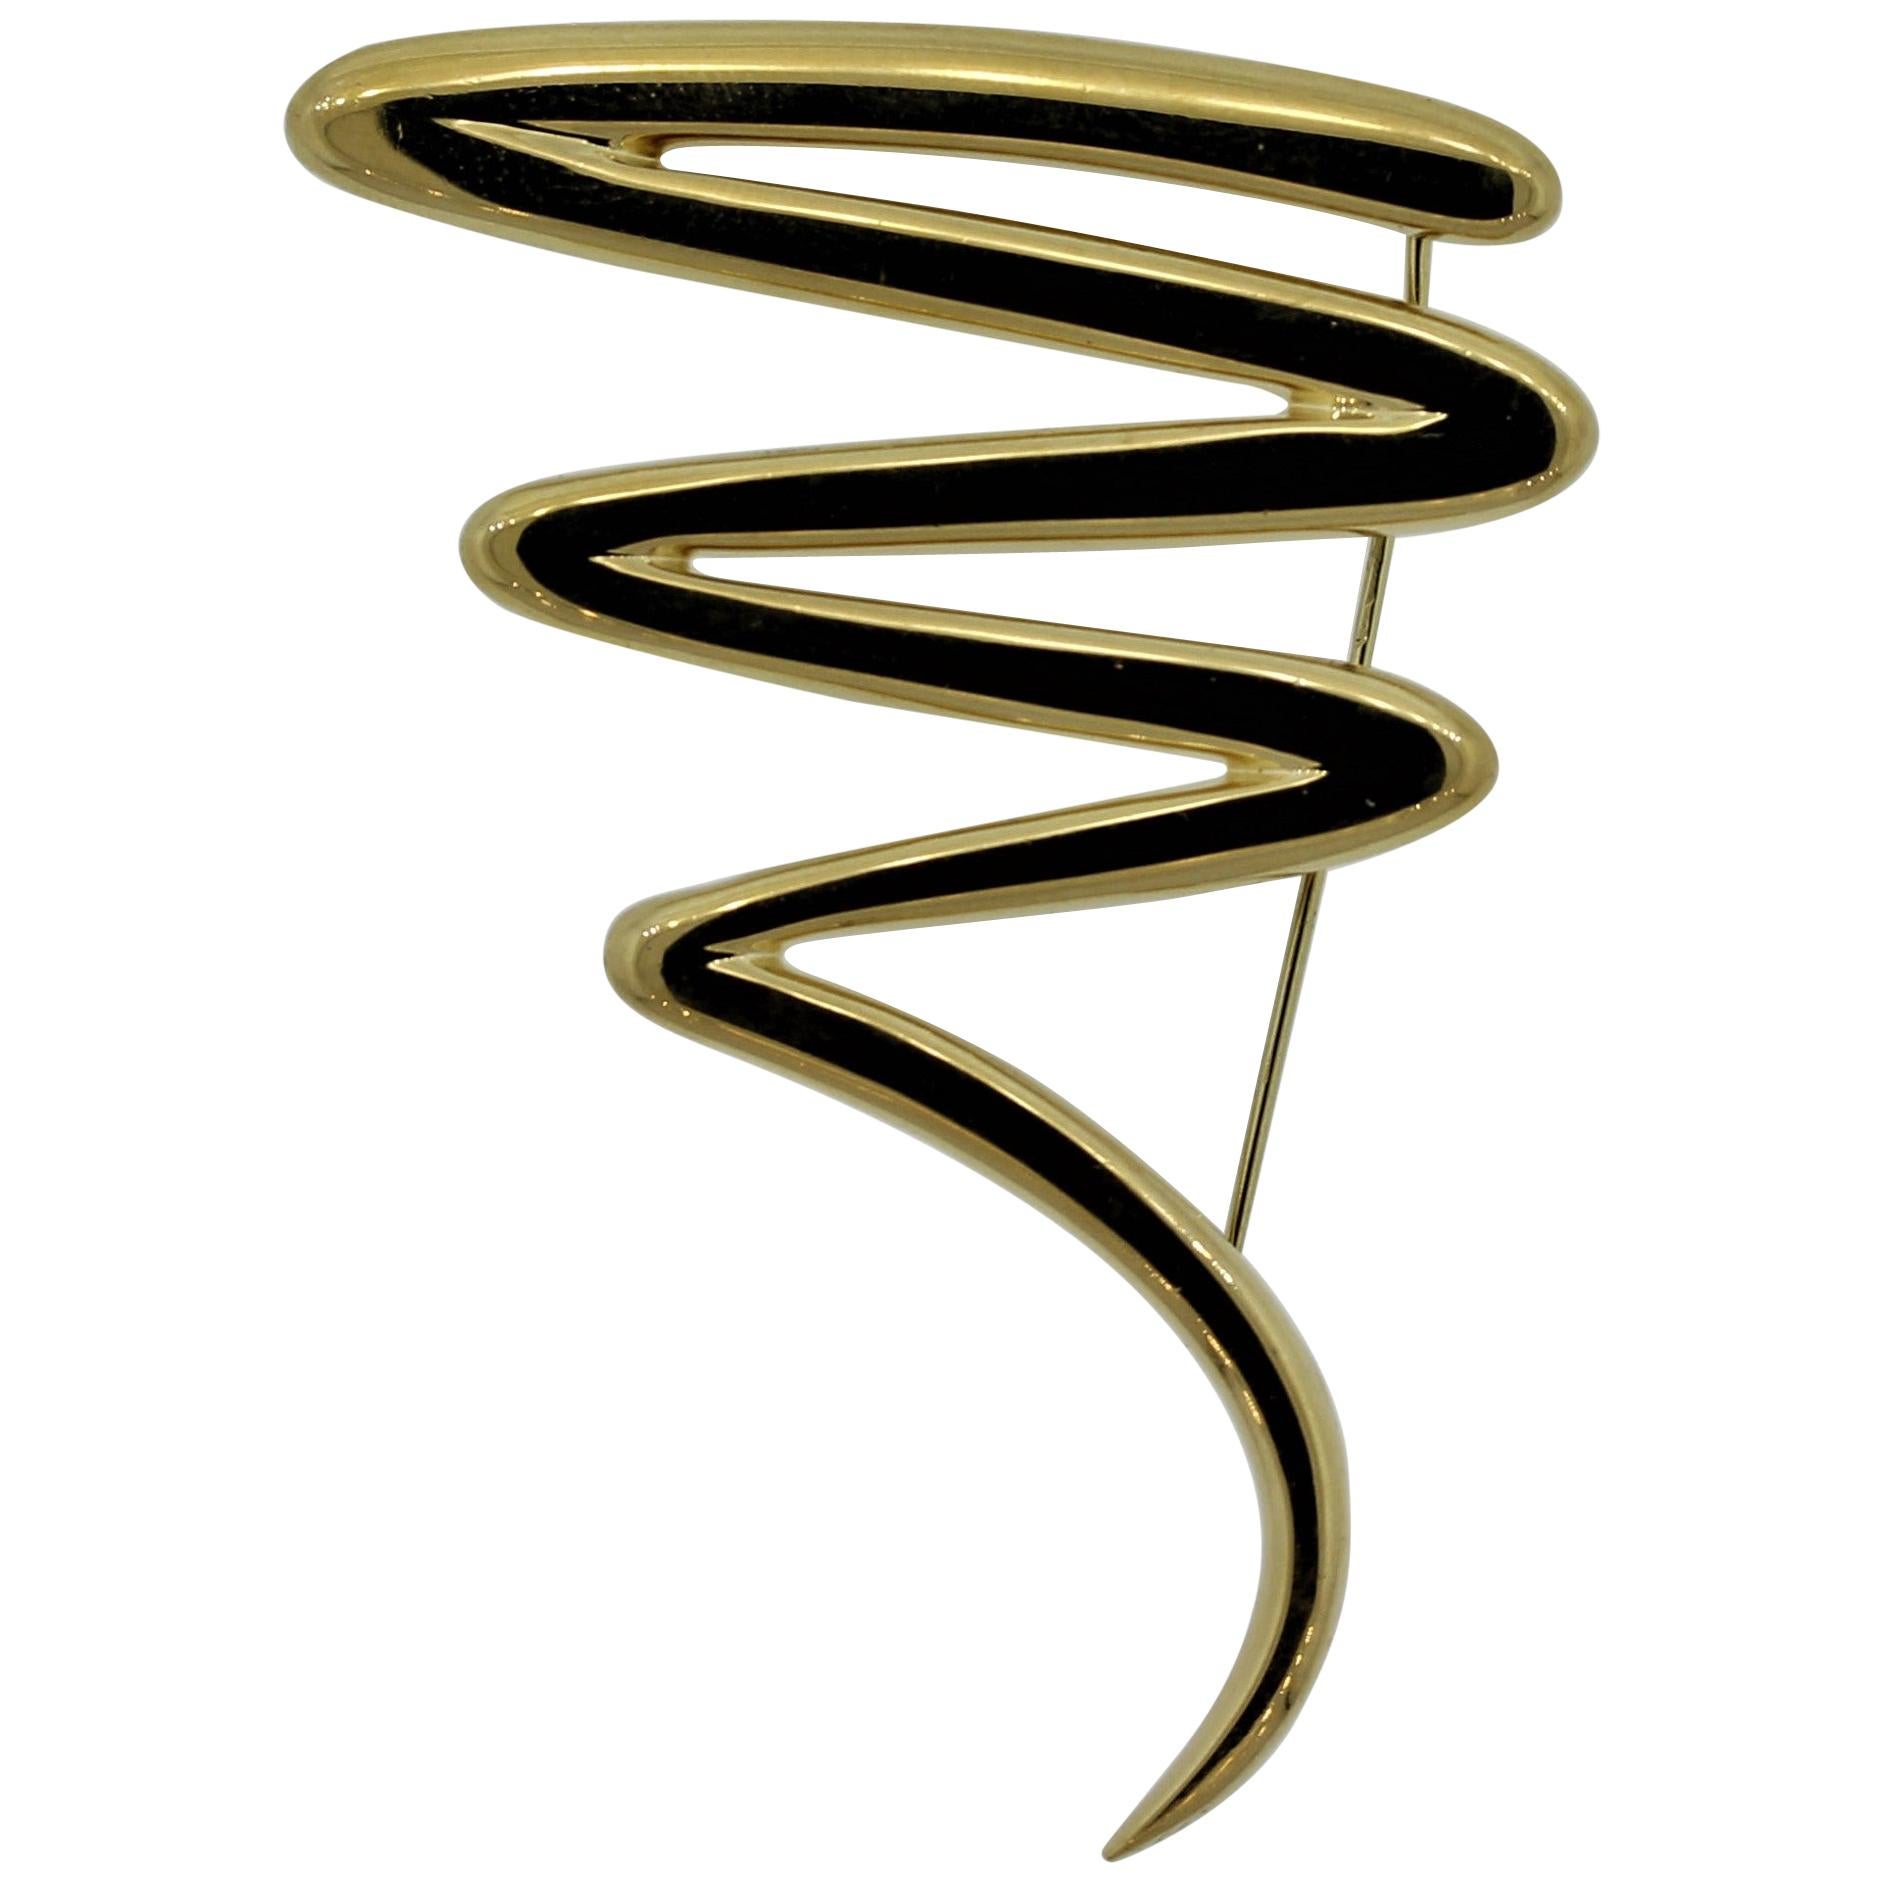 Tiffany & Co. Gold “Zig-Zag” Brooch, Paloma Picasso For Sale